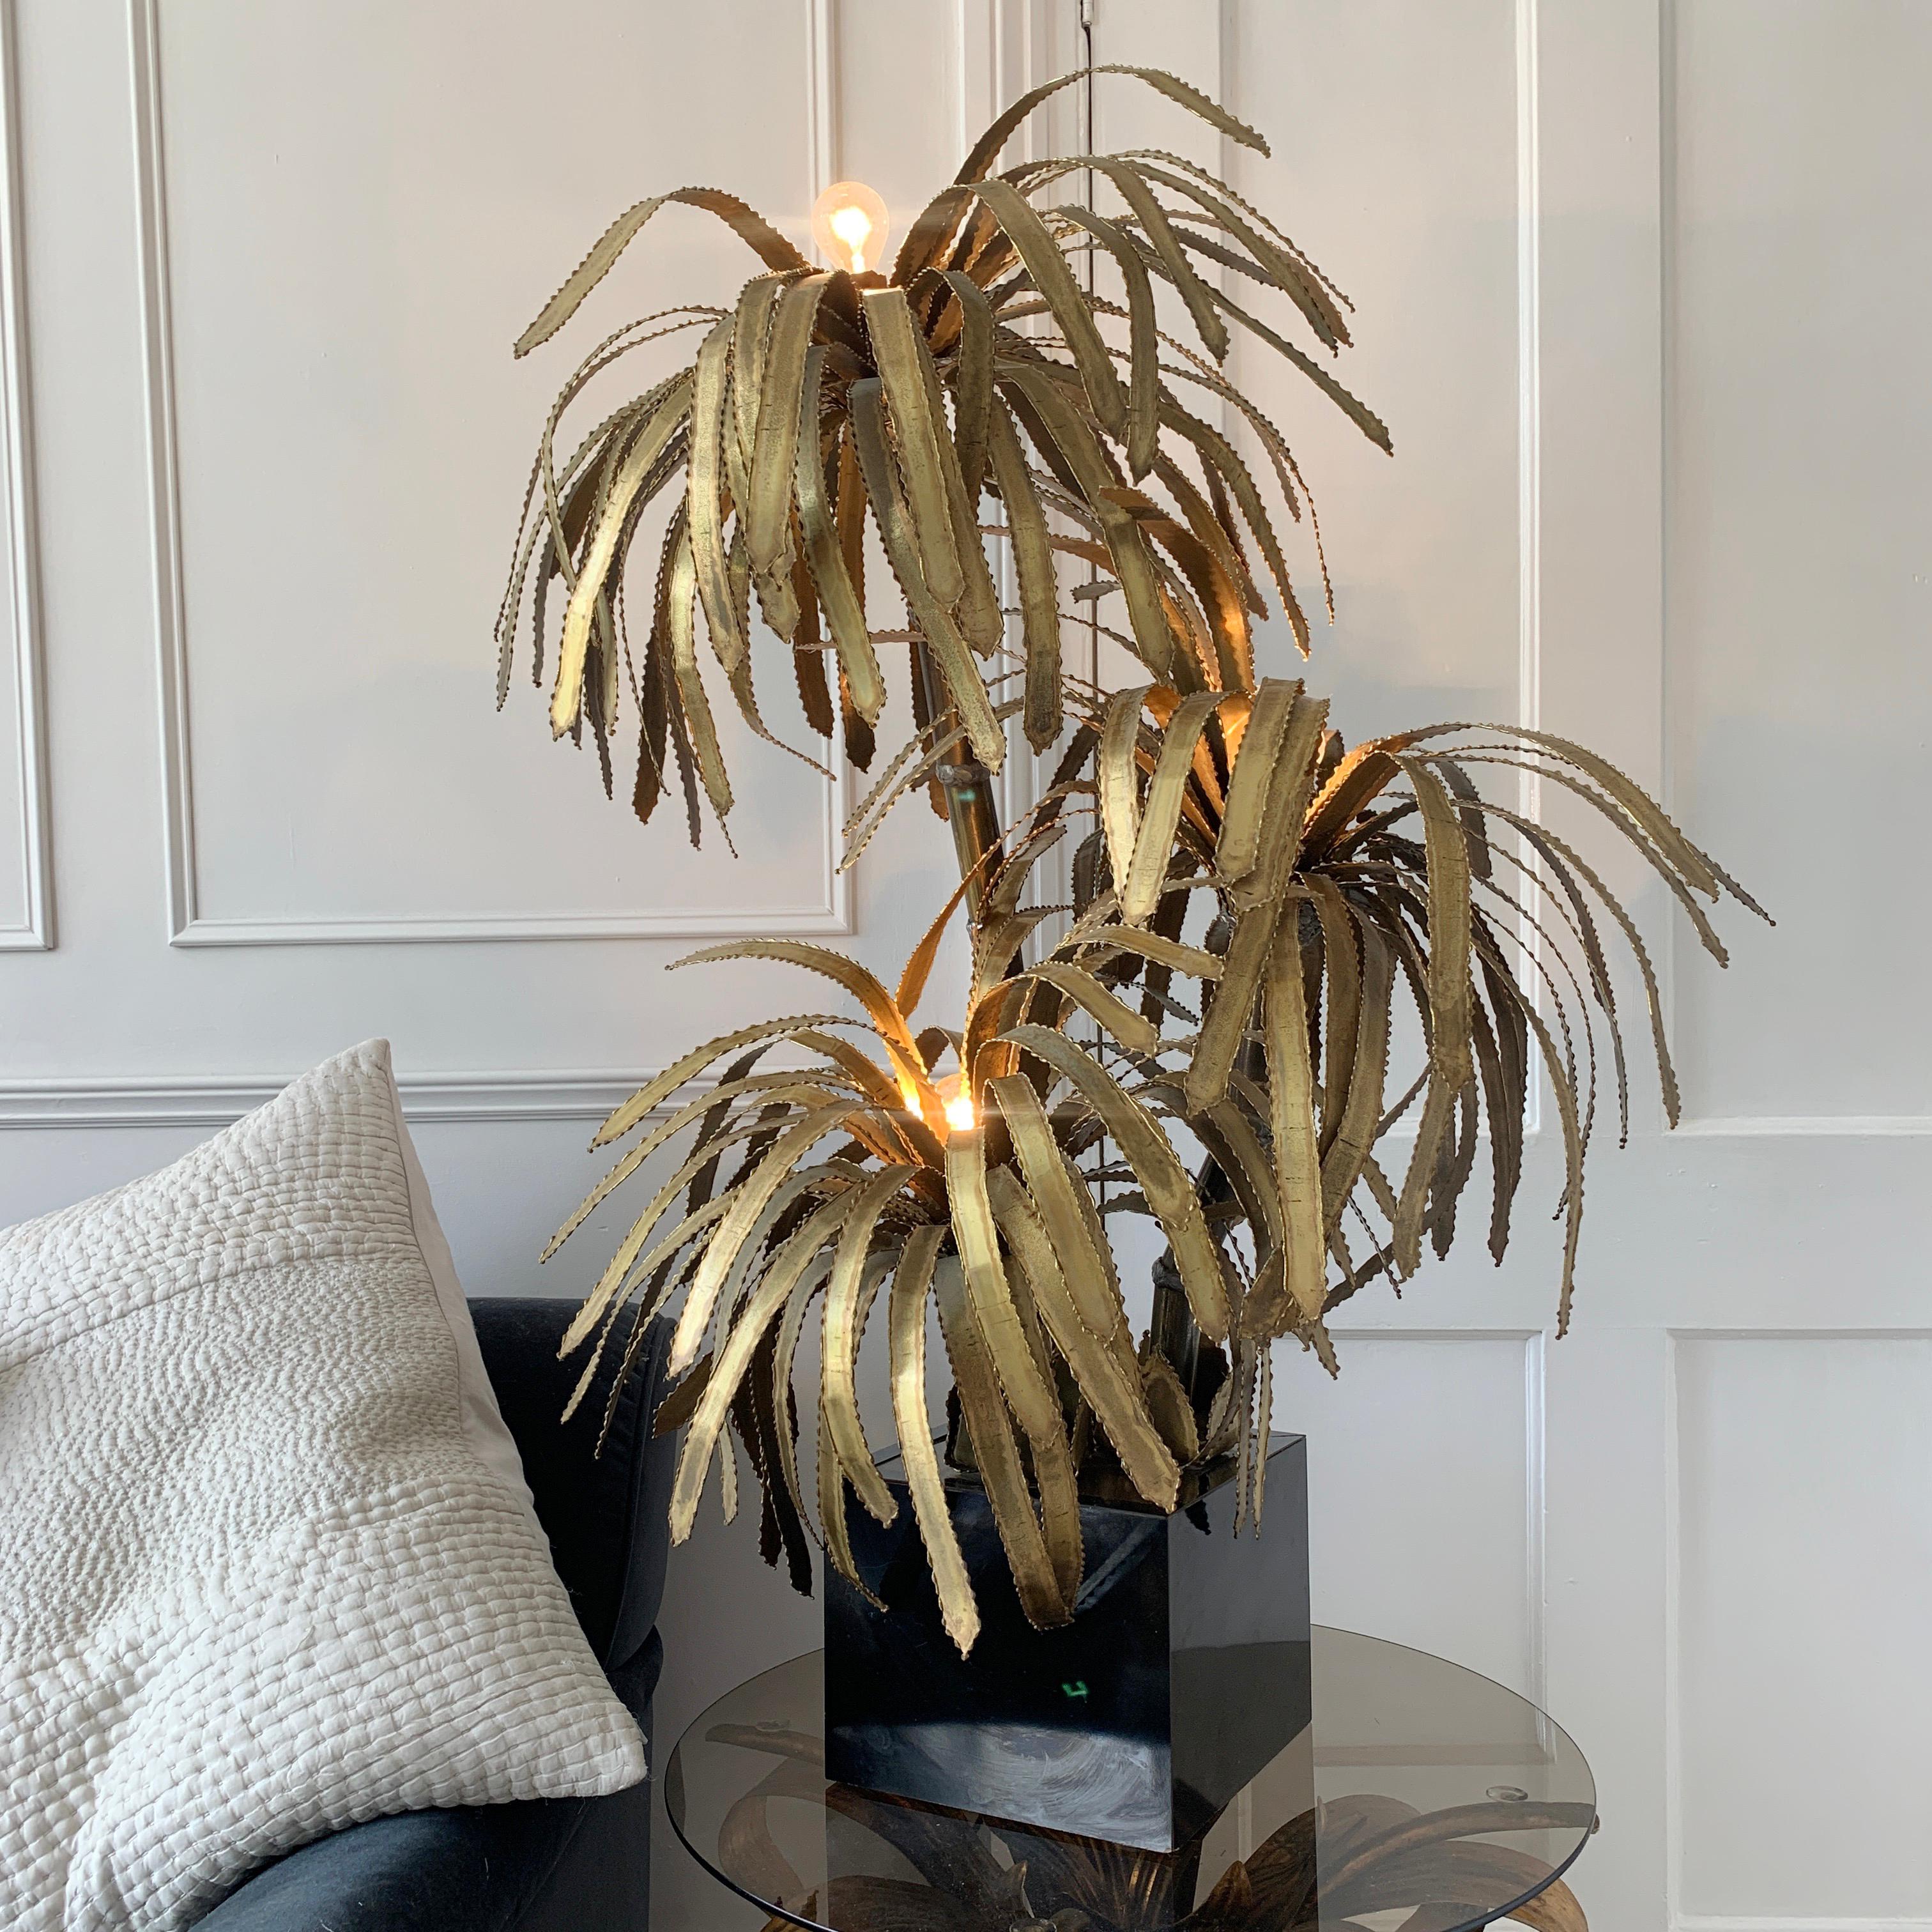 Maison Jansen brass palm tree lamp.
France, 1970s.
This is an original and unique piece, classic Maison Jansen design.
There are three main stems to the lamp with a single light fitting in each of the palm leaf tops.
The base pot is black in